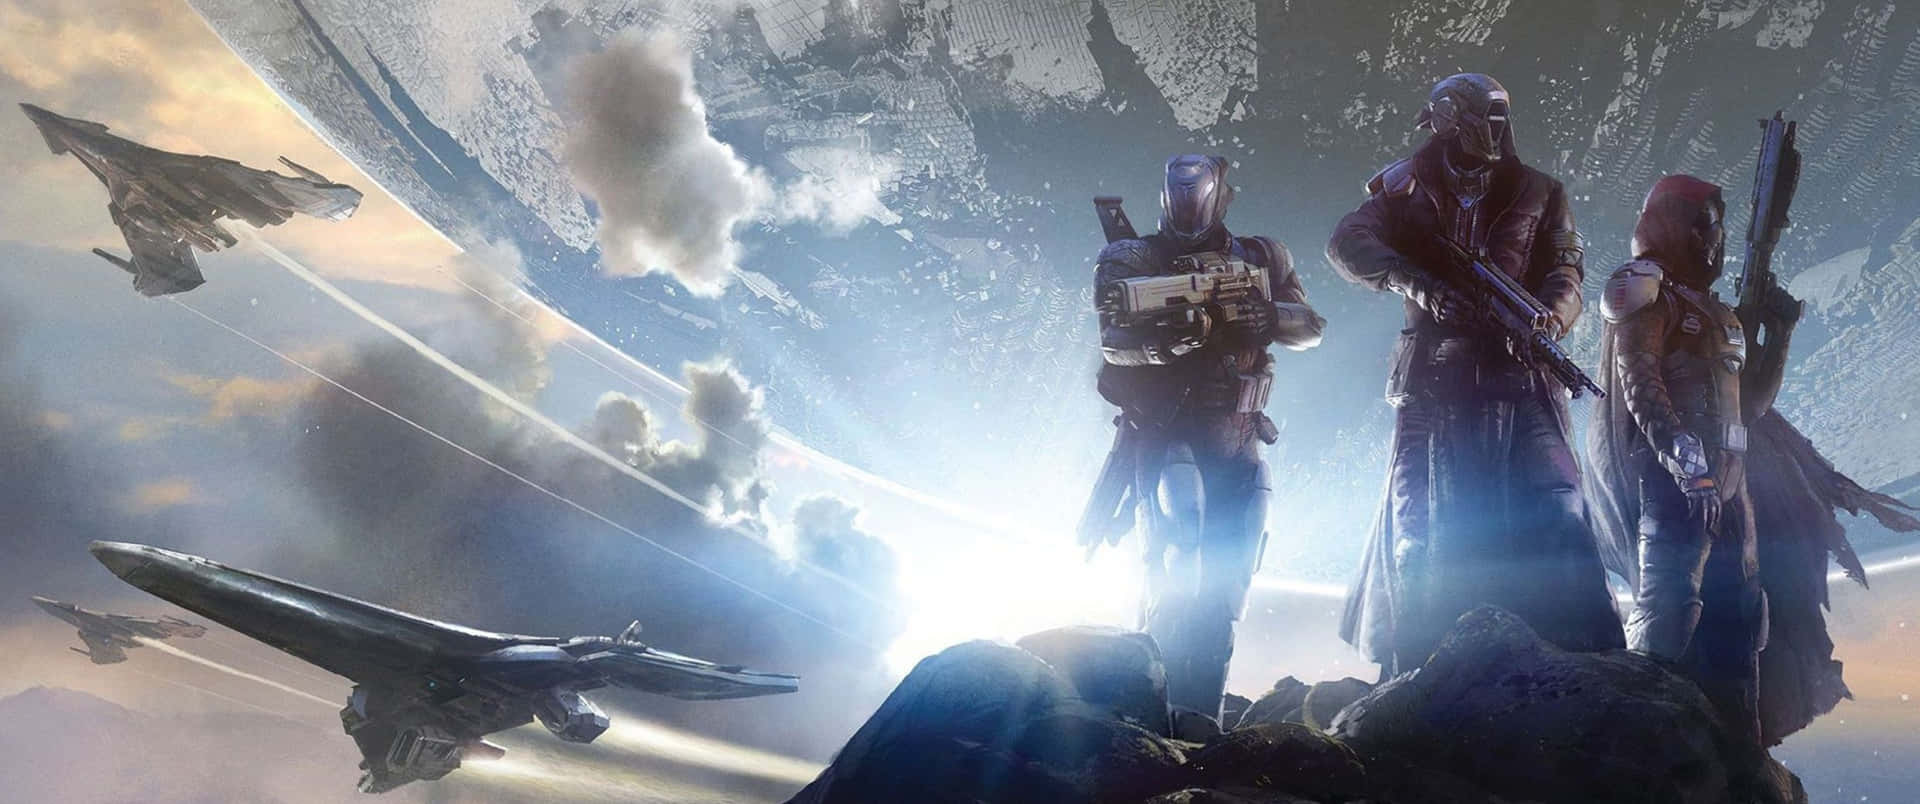 The Last City From Destiny 2, An Epic Sci-Fi Adventure